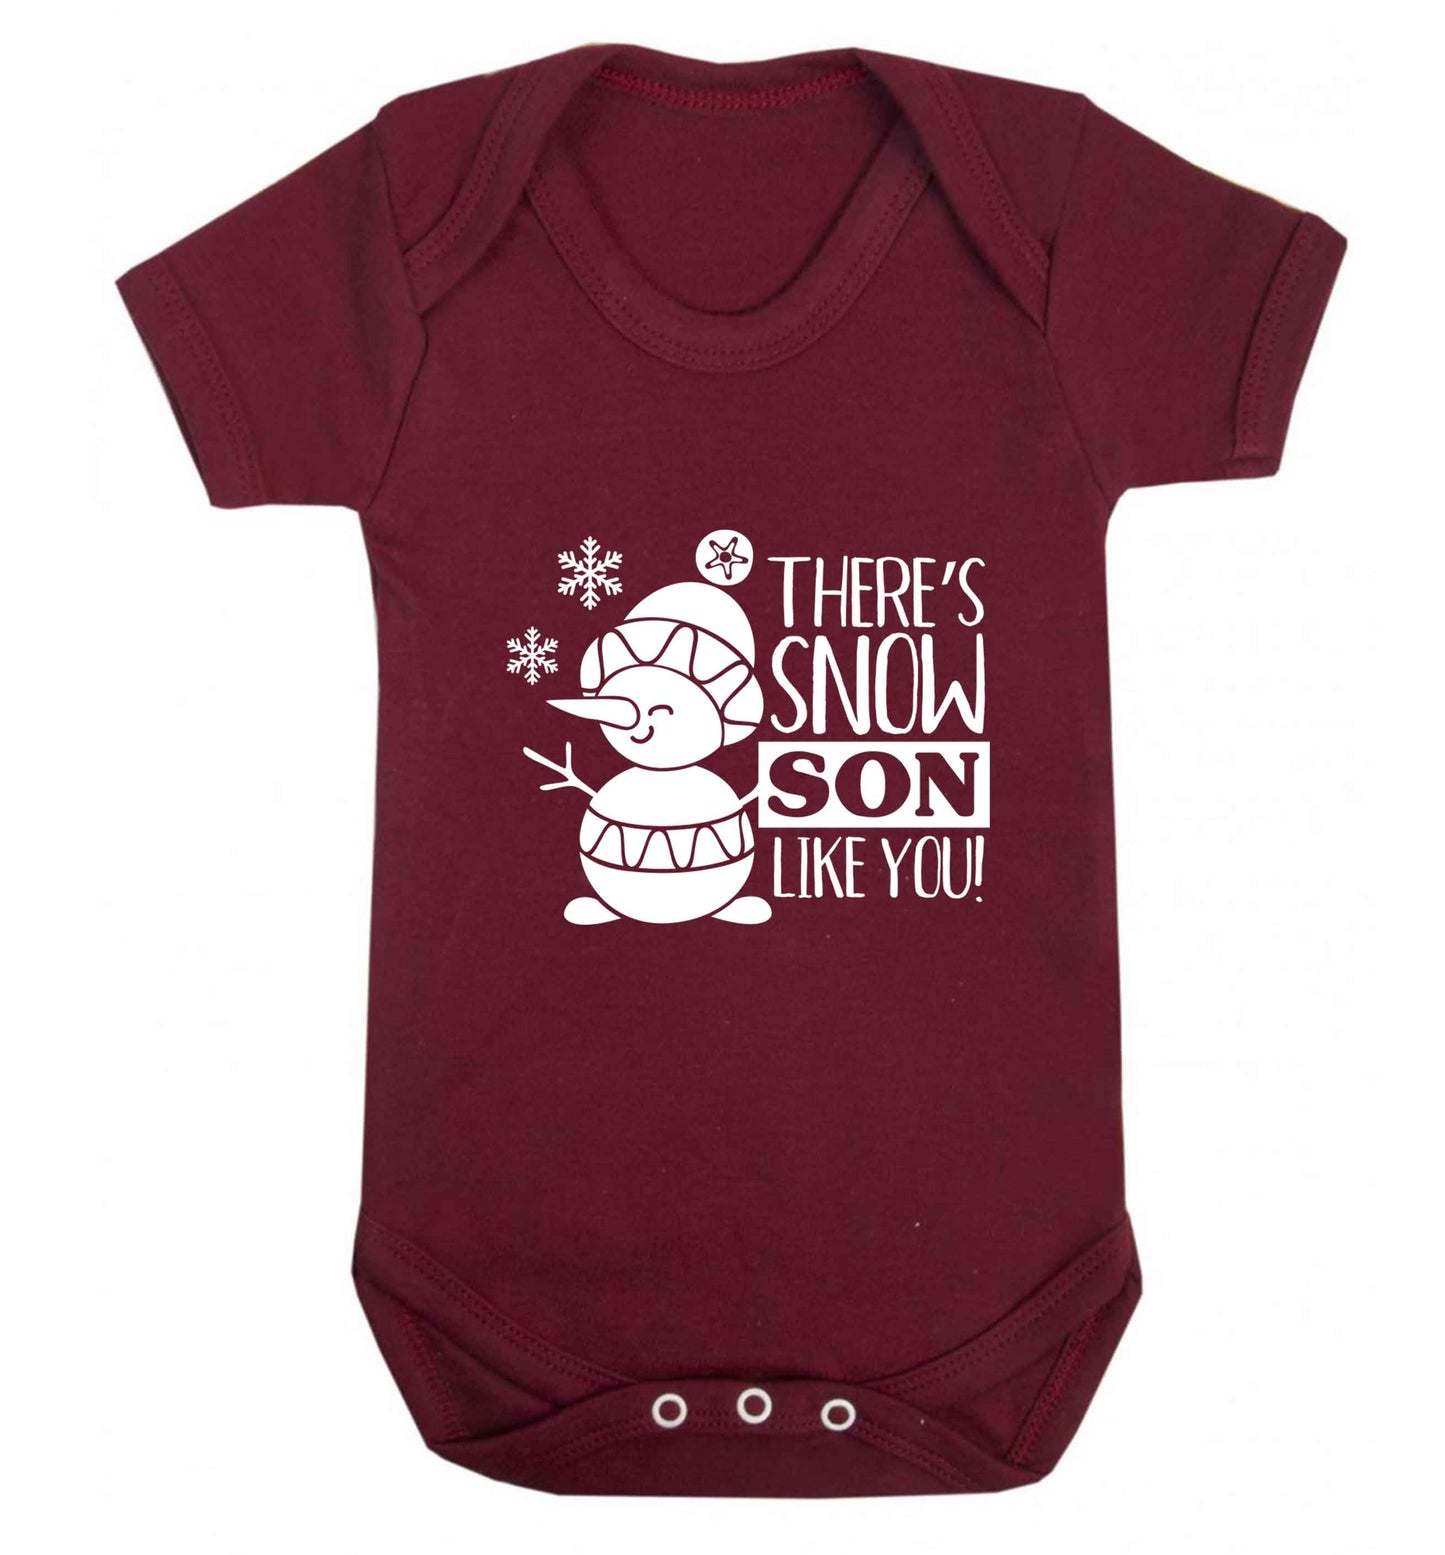 There's snow son like you baby vest maroon 18-24 months